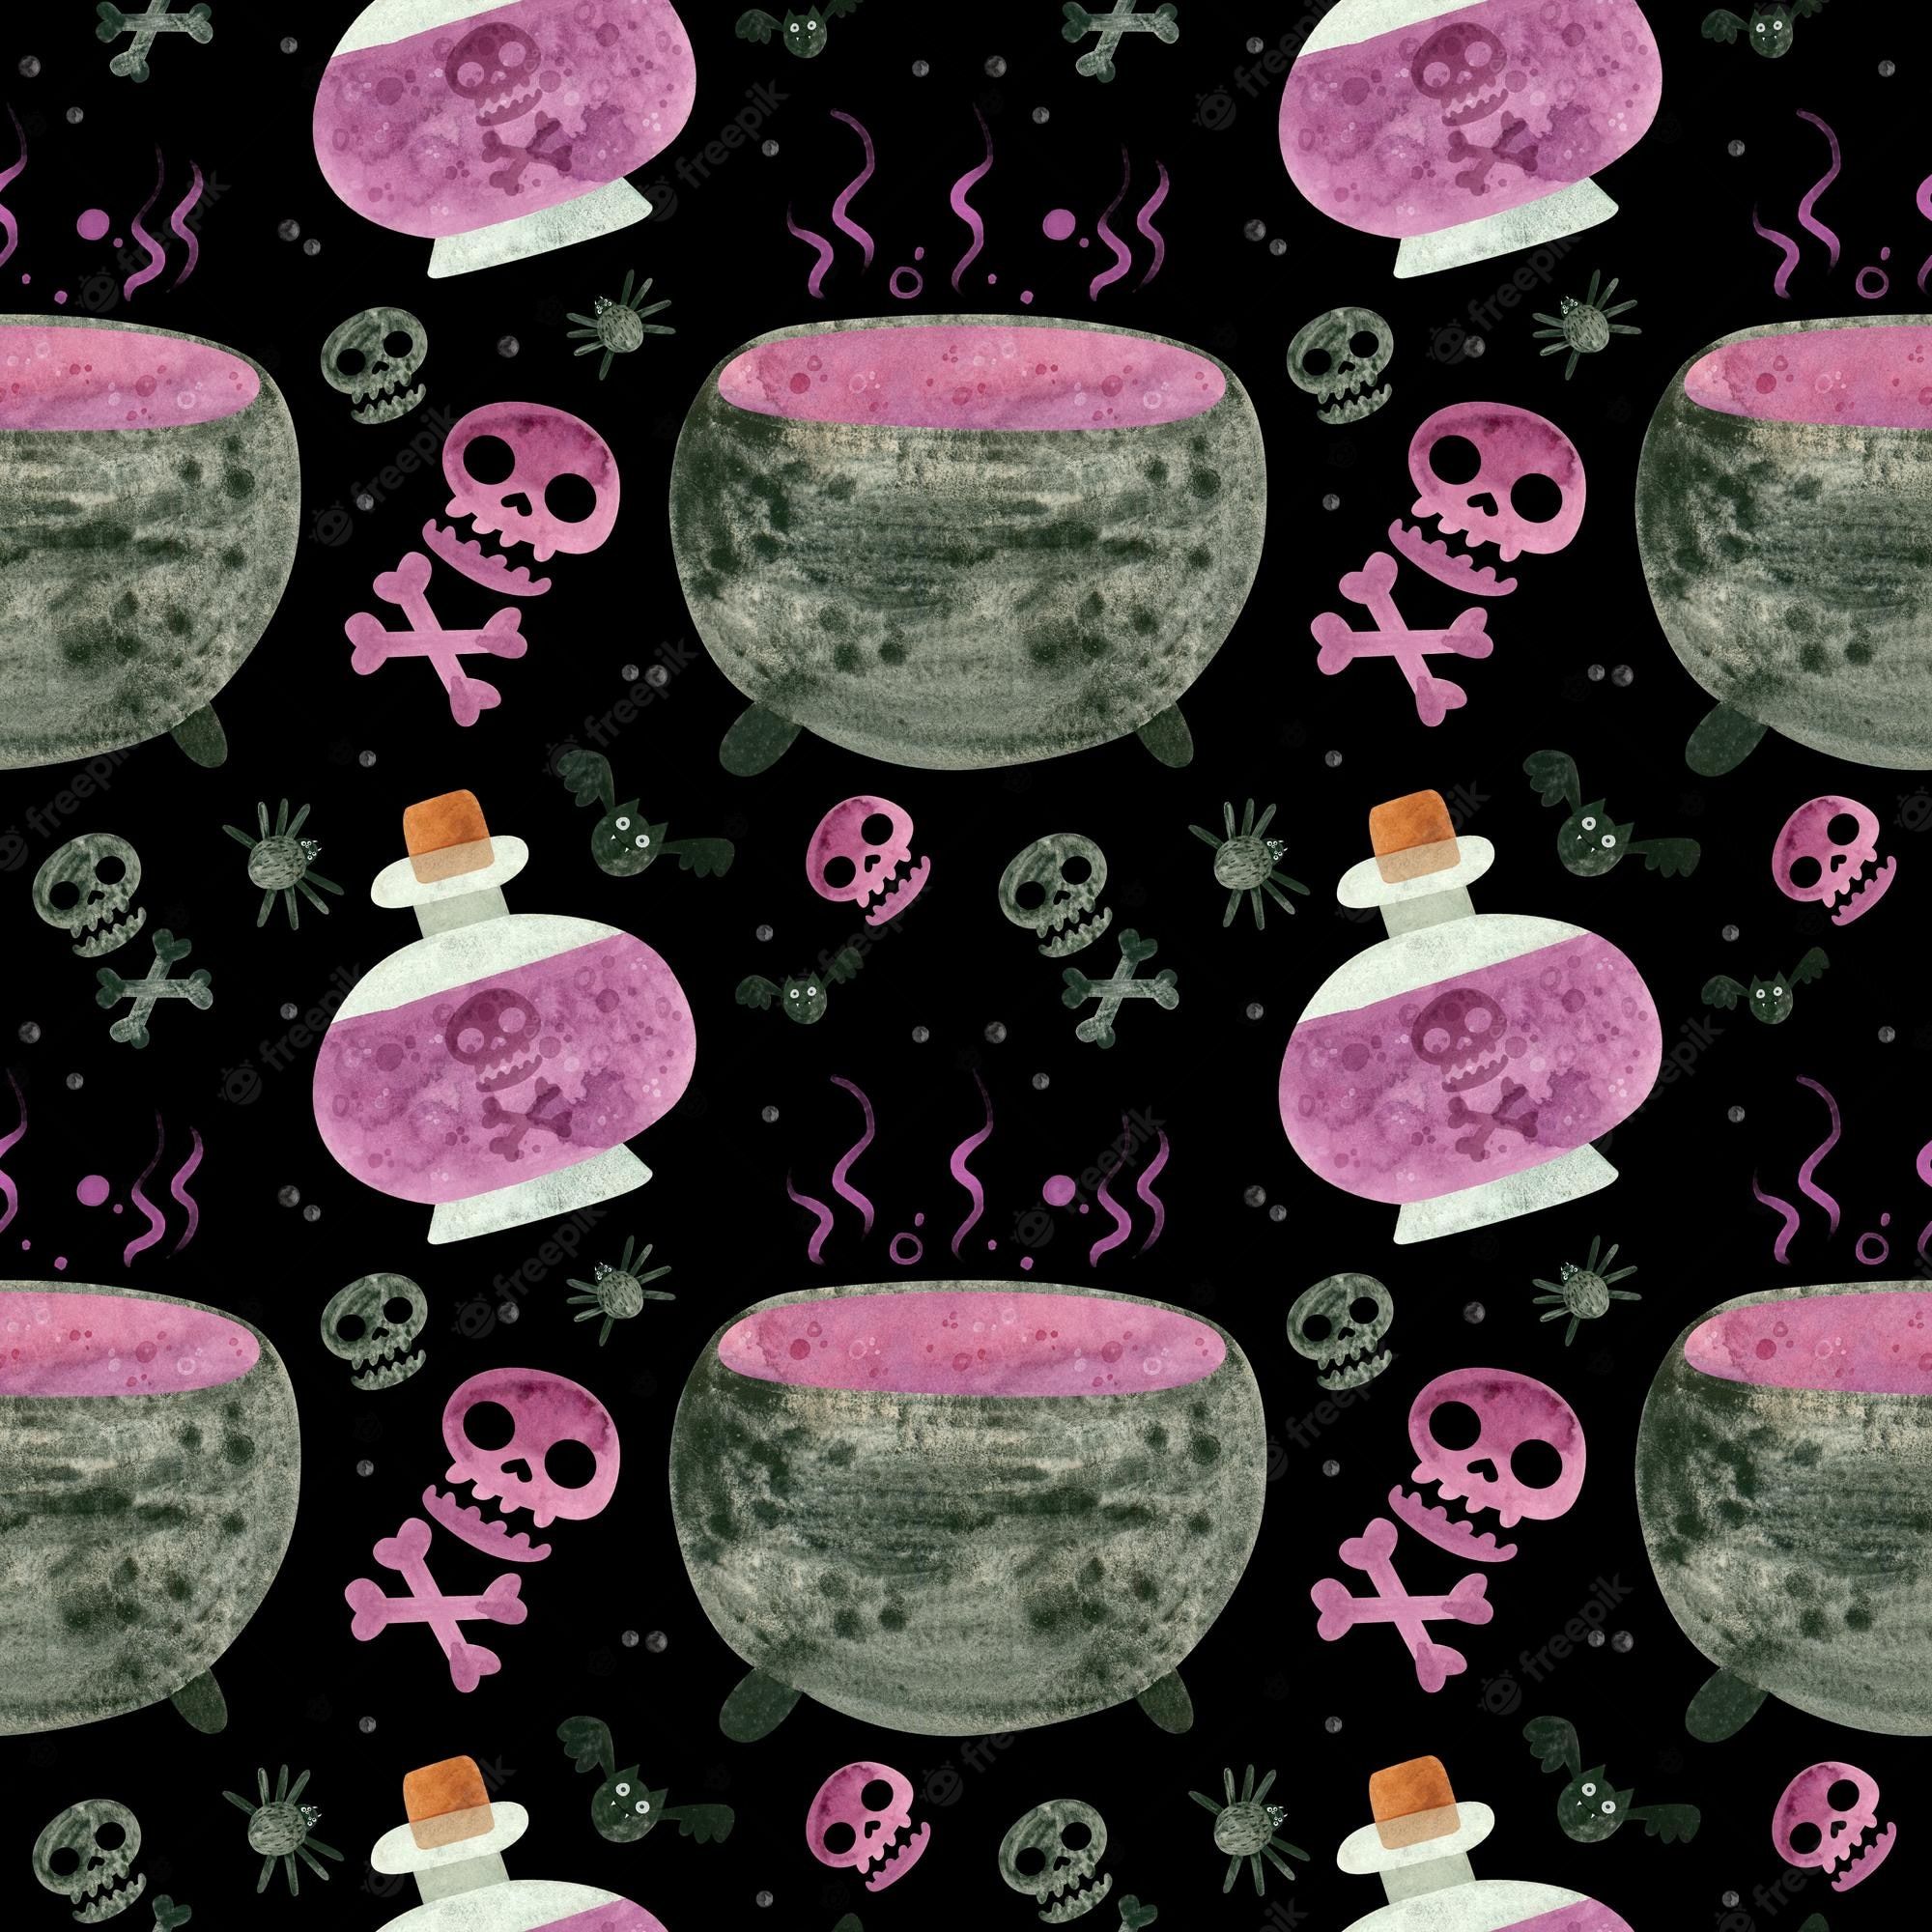 Witchy wallpaper Vectors & Illustrations for Free Download